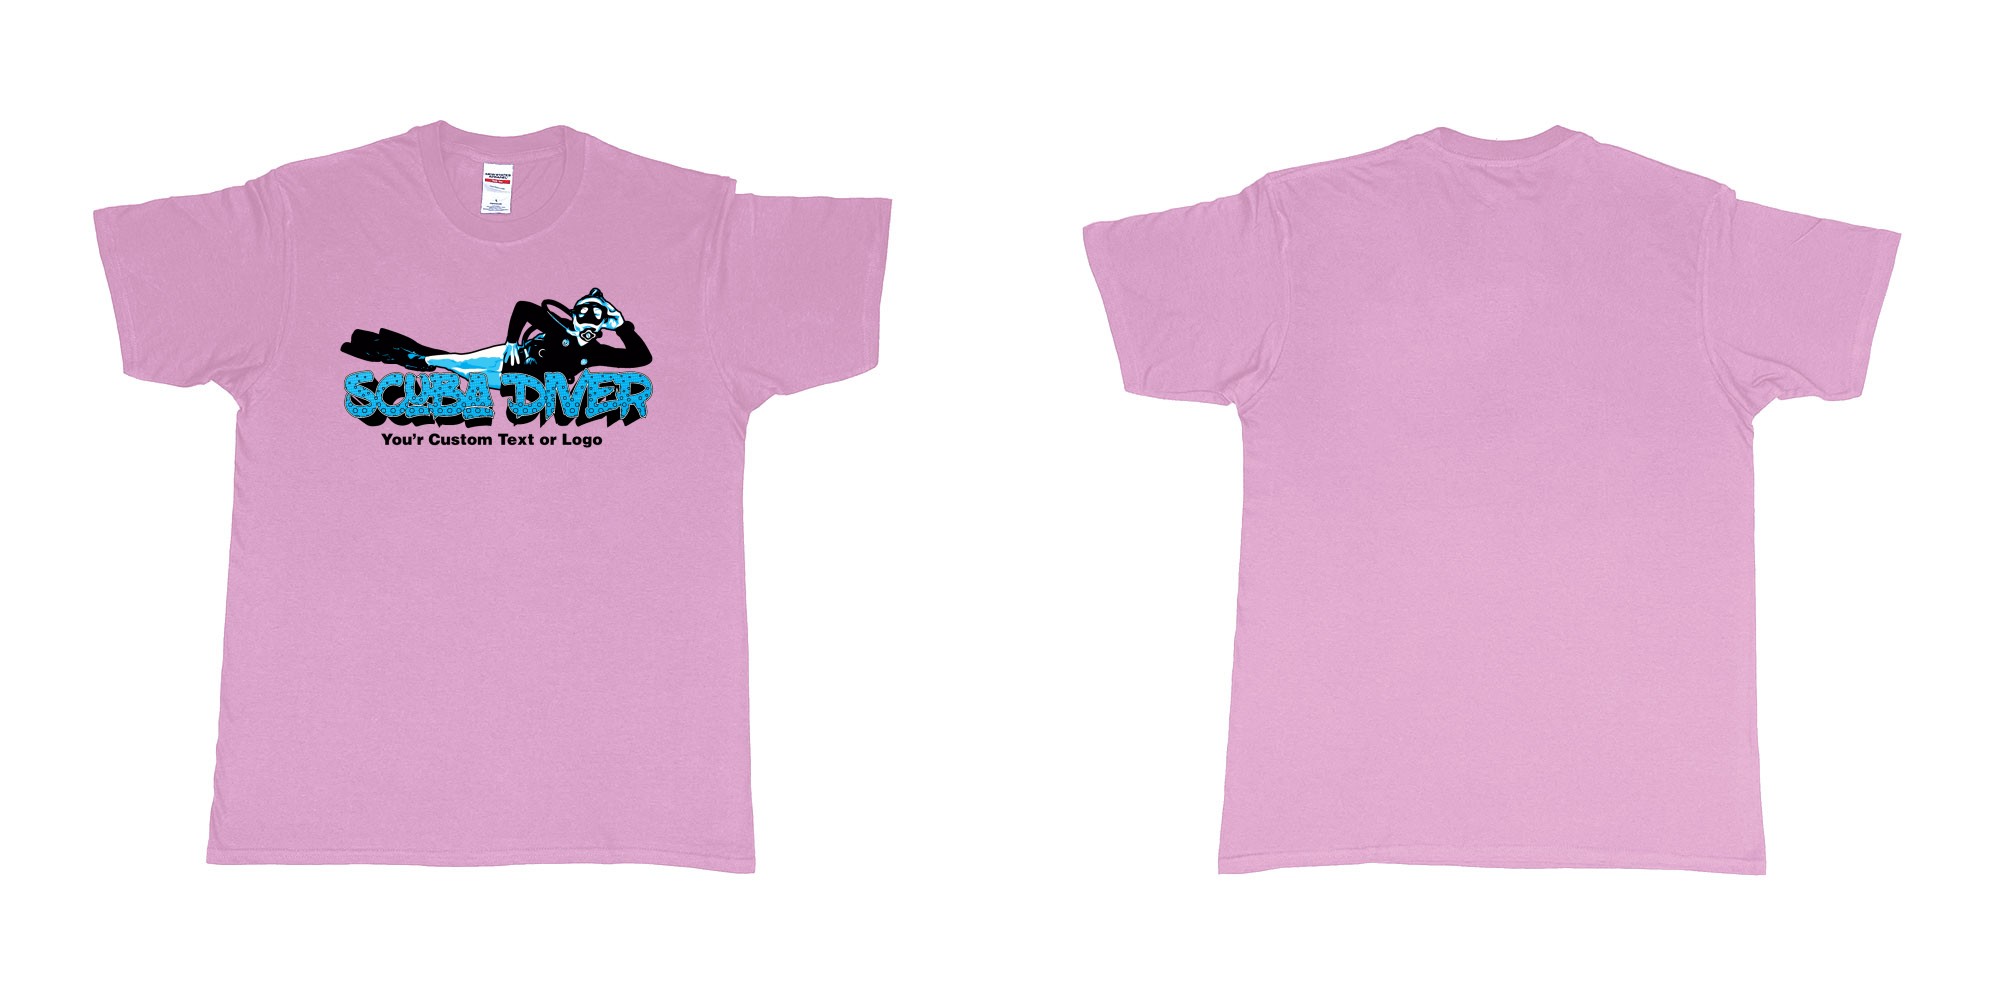 Custom tshirt design relaxed scuba diver in fabric color light-pink choice your own text made in Bali by The Pirate Way